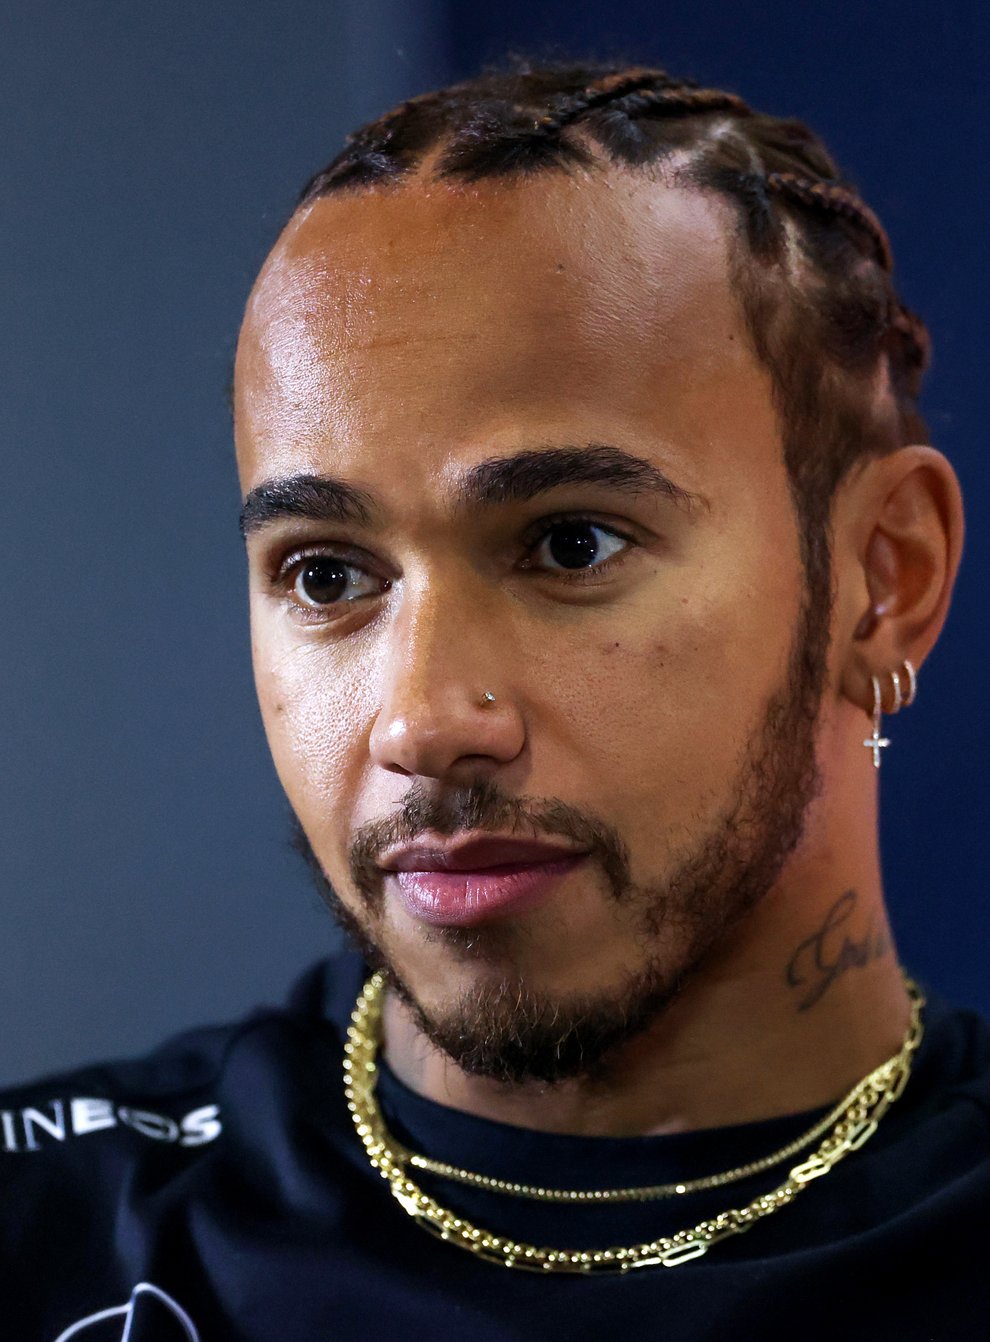 Lewis Hamilton wants Formula One to do more on human rights